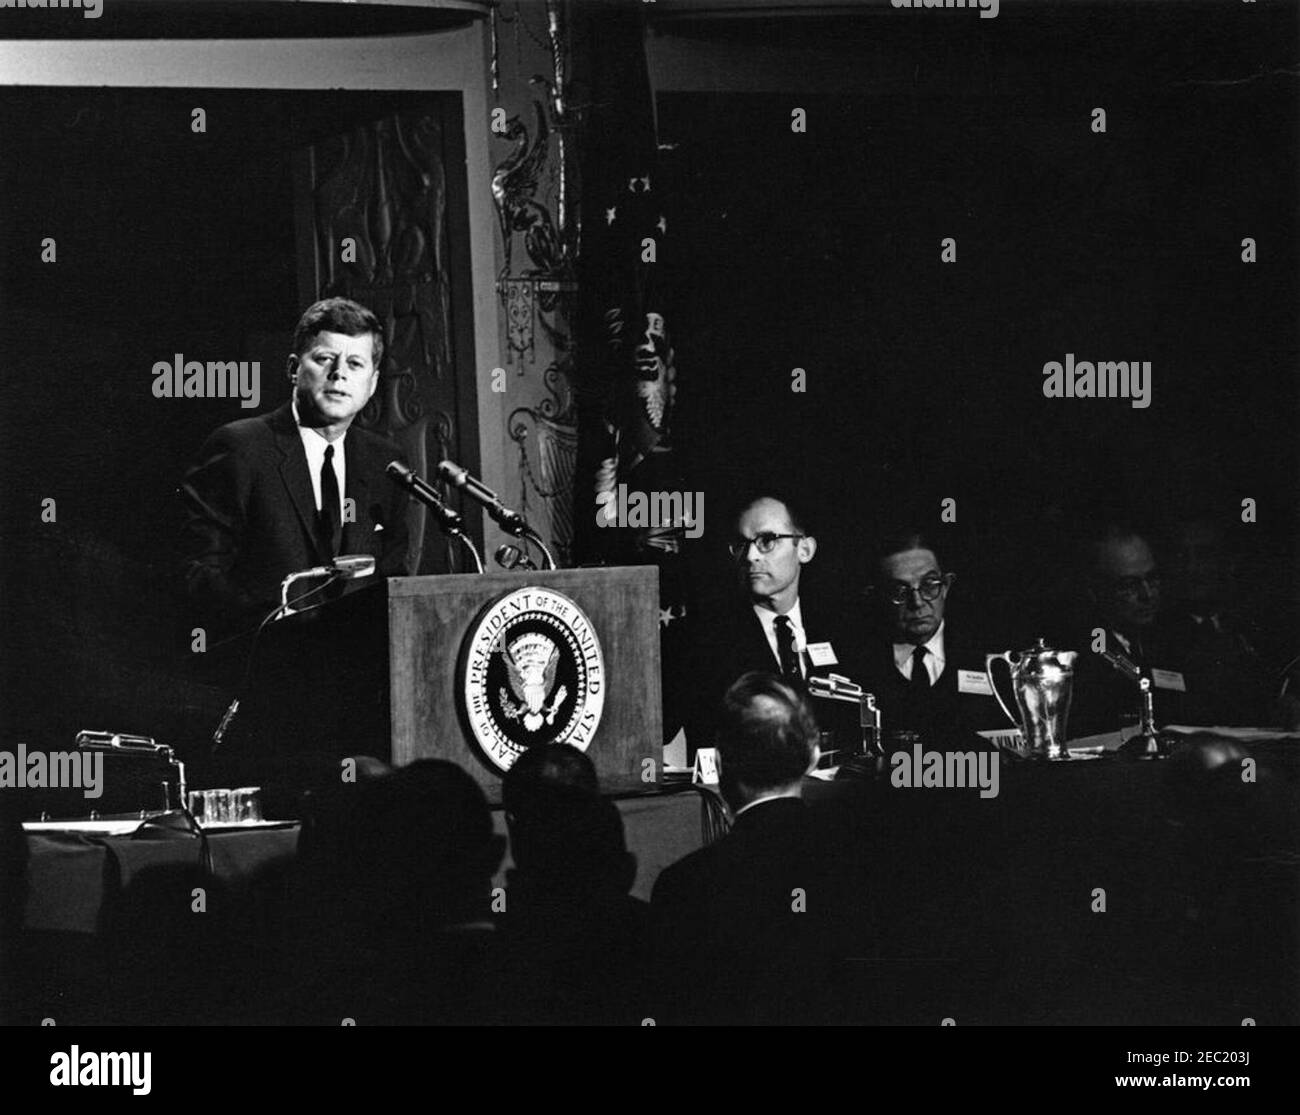 Address to the Symposium on Economic Growth, 9:53AM. President John F. Kennedy (at lectern) delivers remarks at the American Bankers Association (ABA) Symposium on Economic Growth. Seated right of lectern: Chairman of the First National Bank in Thomson, Georgia, M. Monroe Kimbrel; Managing Director of the International Monetary Fund (IMF), Per Jacobsson. Mayflower Hotel, Washington, D.C. Stock Photo